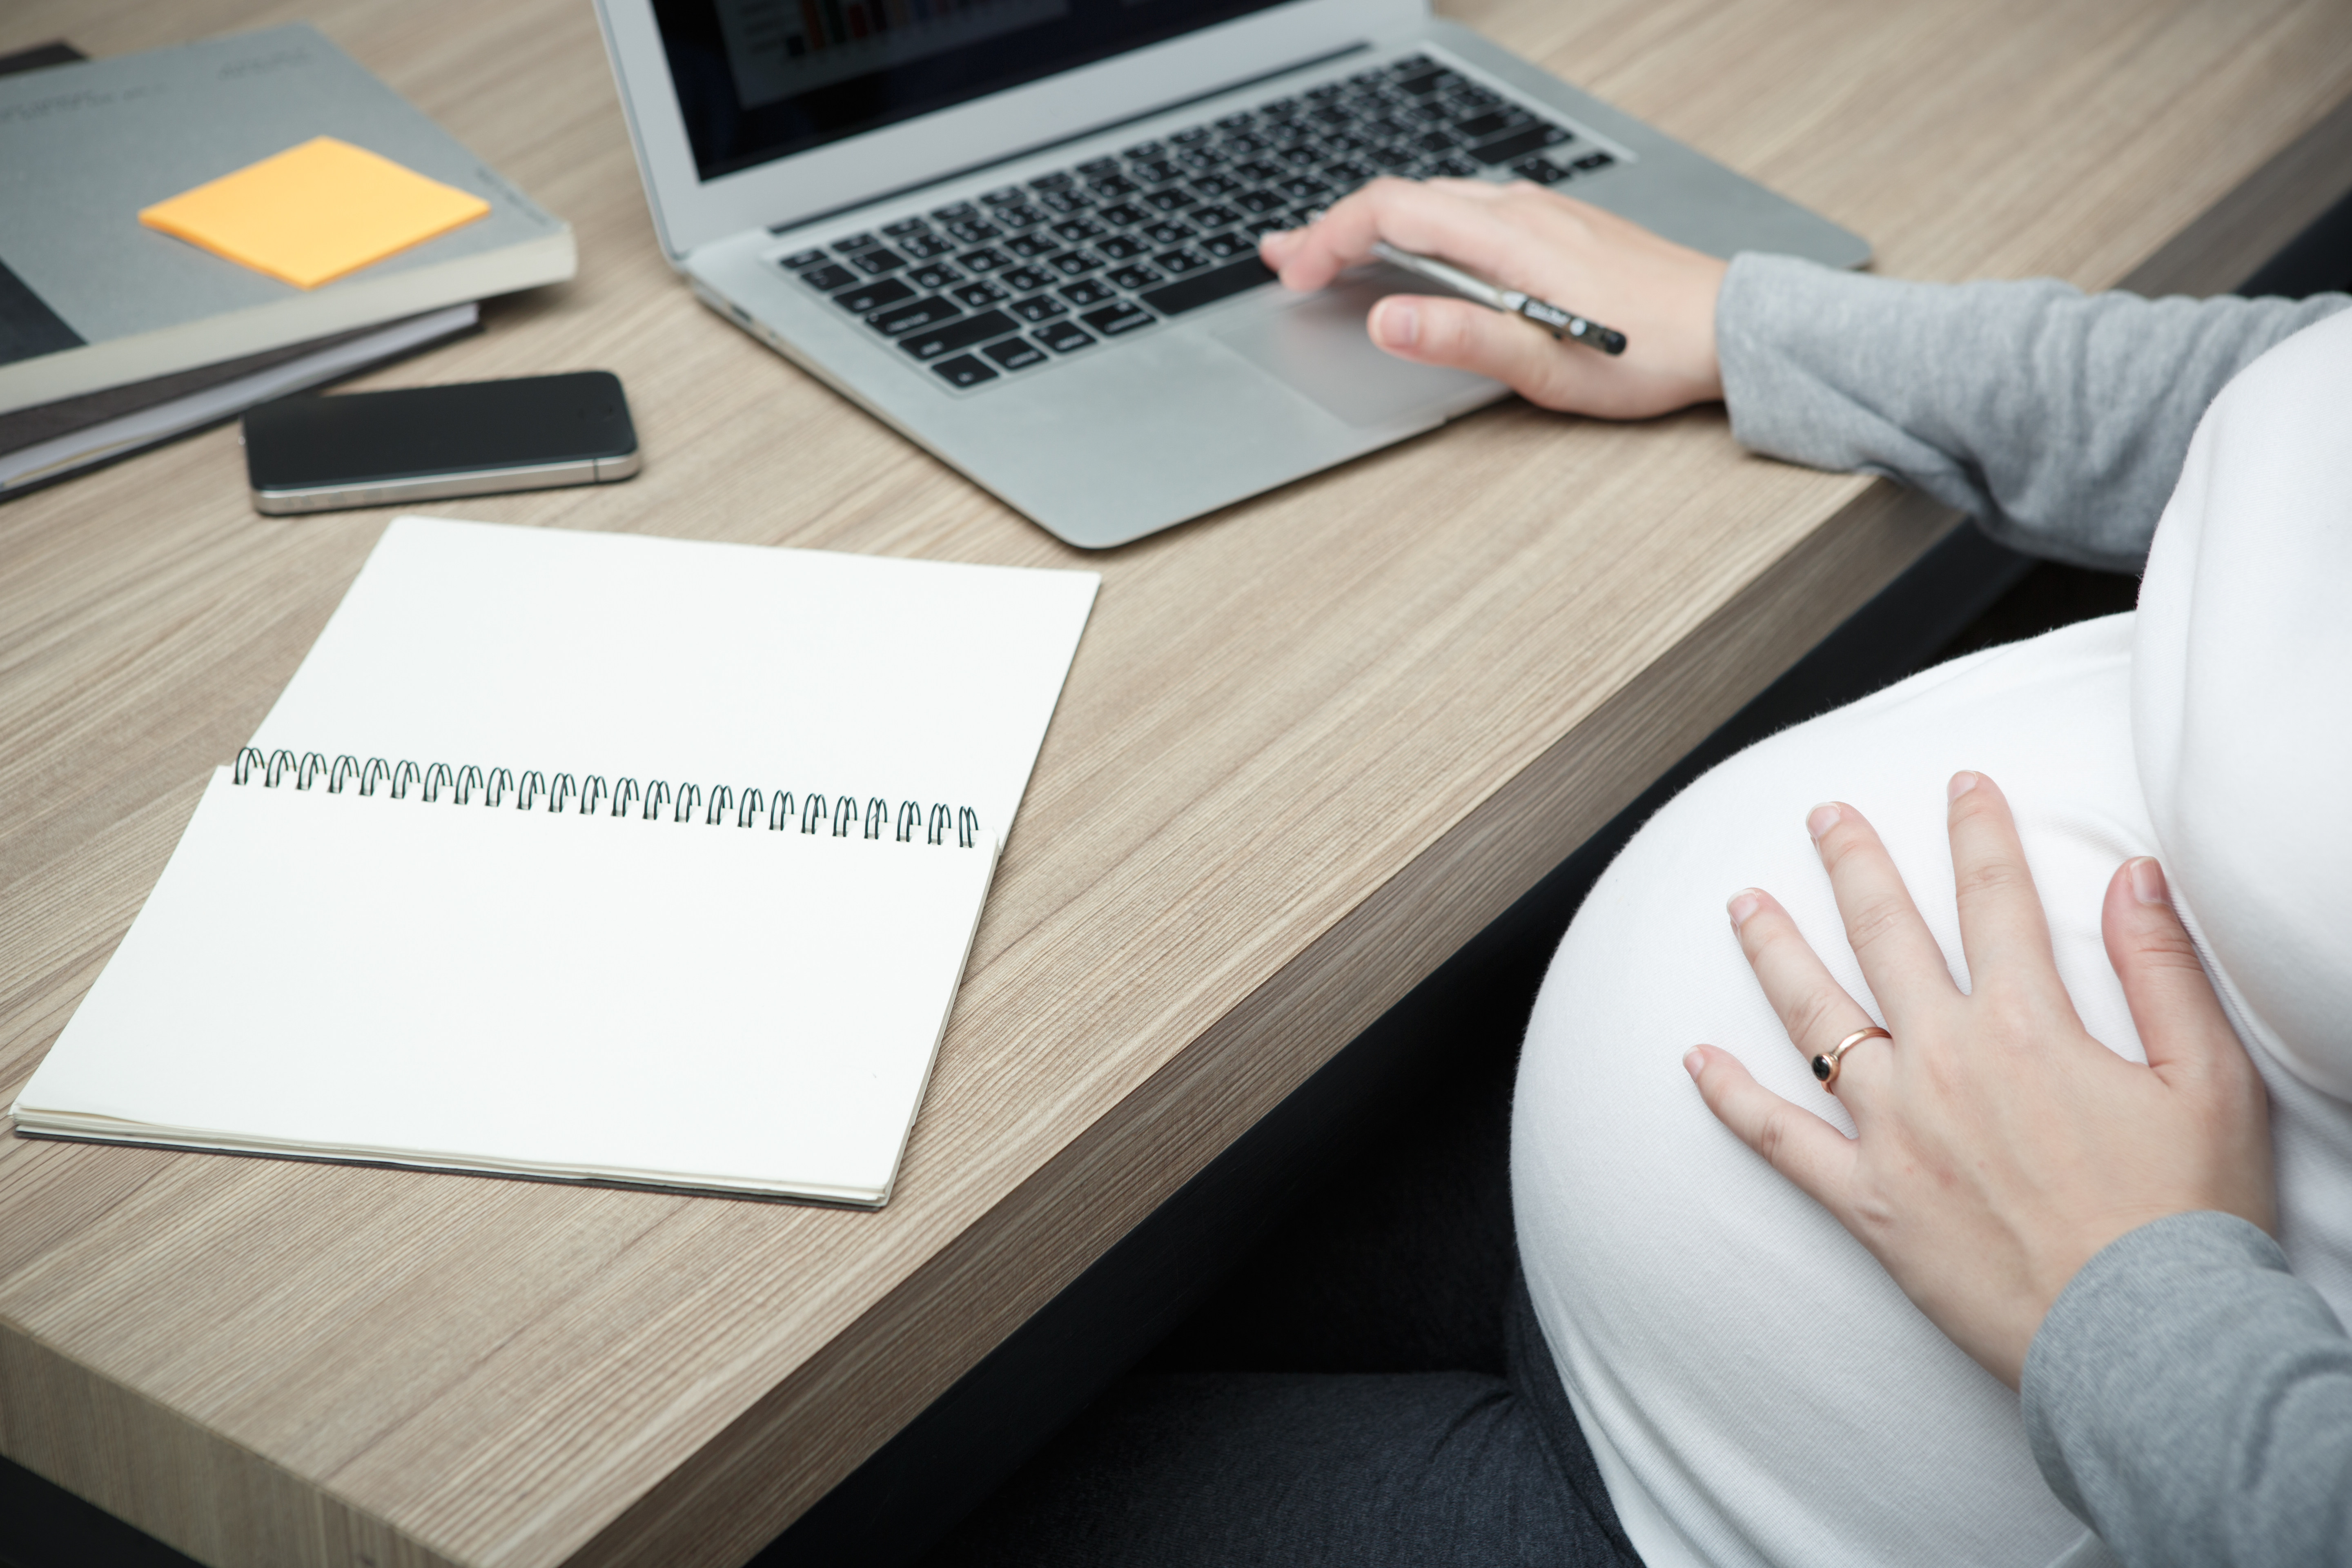 A court ruling in favour of a woman who was denied maternity leave sends a signal the government is serious about supporting women, say lawyers. Photo: Shutterstock